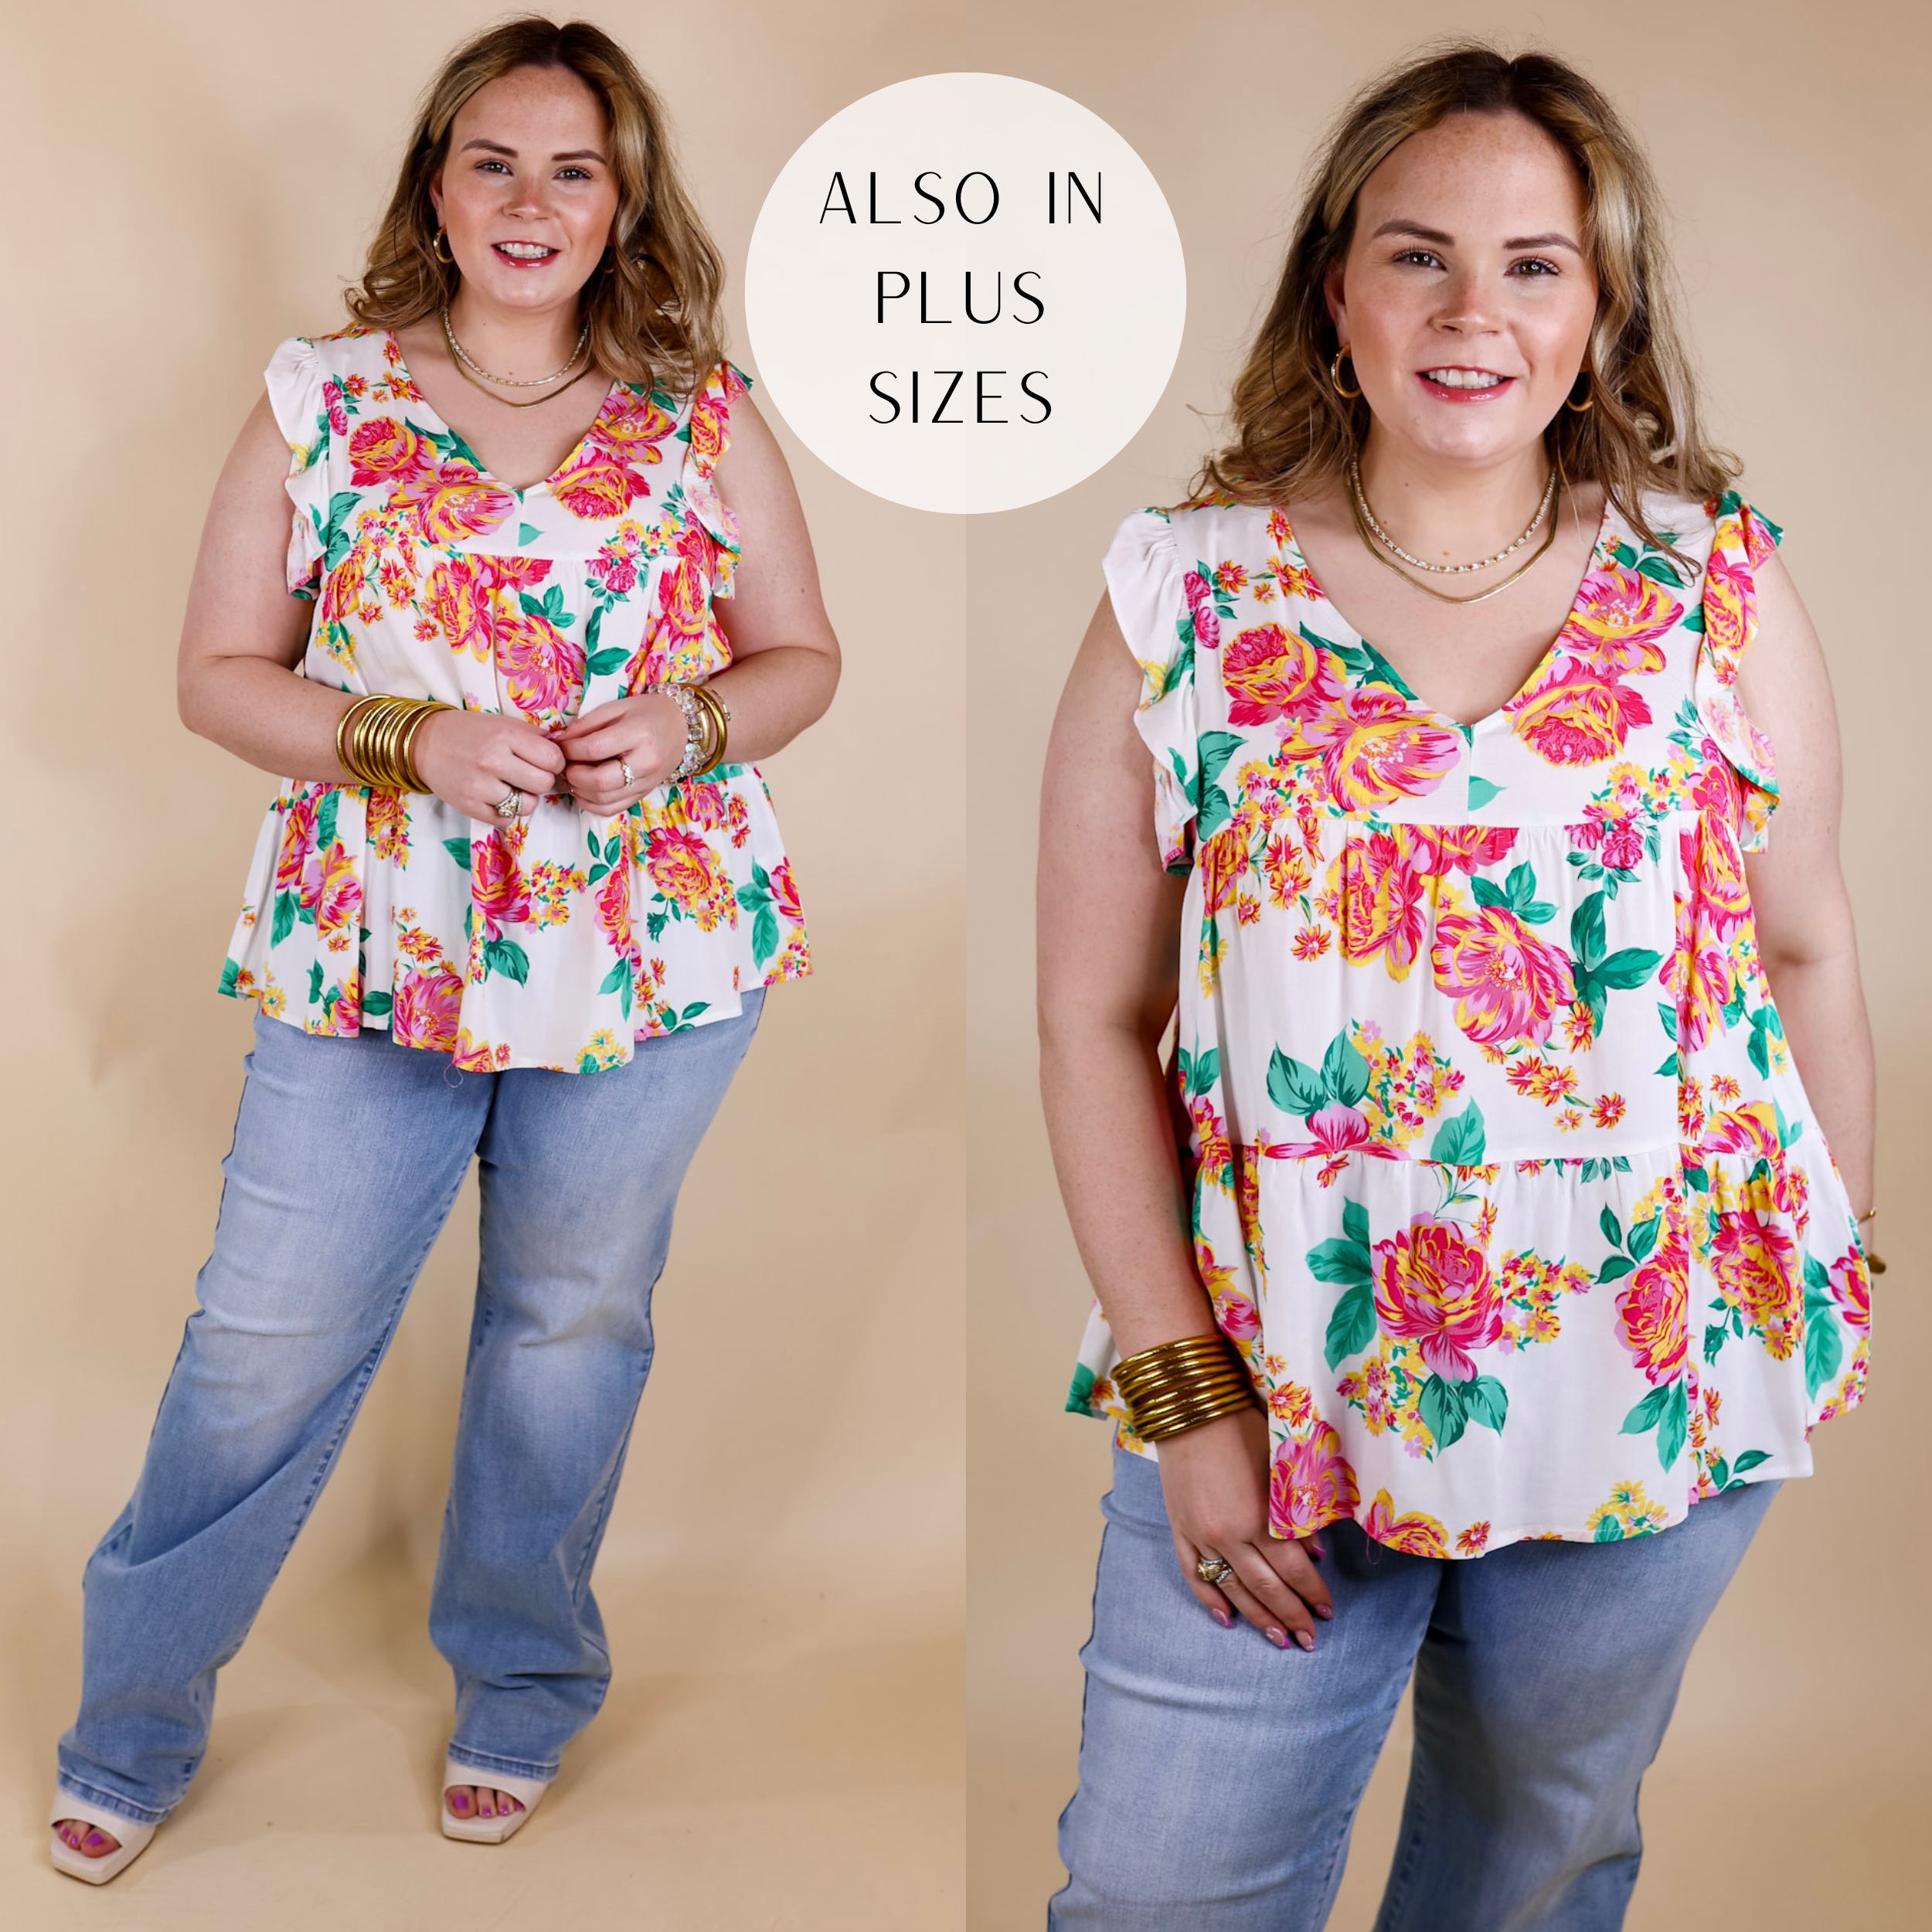 Model is wearing a white top with ruffle cap sleeves, v neckline, and yellow, green, and pink floral print. Model has this top paired with wide leg jeans, white heels, and gold jewelry.